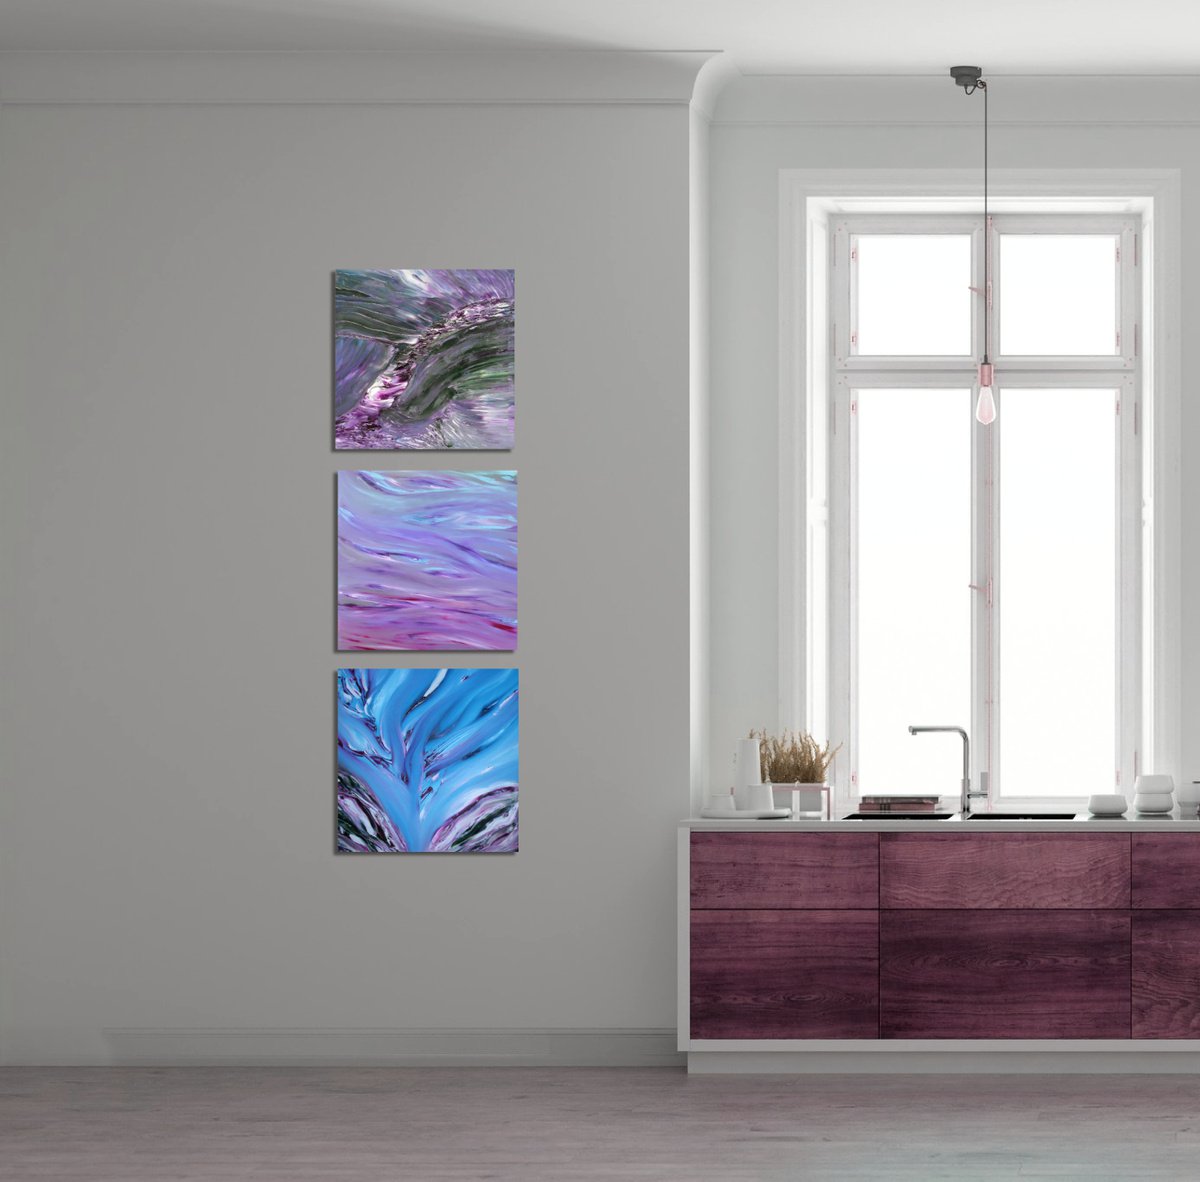 Mantra therapy - Full Series  - Triptych ndeg 3 Paintings, Original abstract, oil on canvas by Davide De Palma